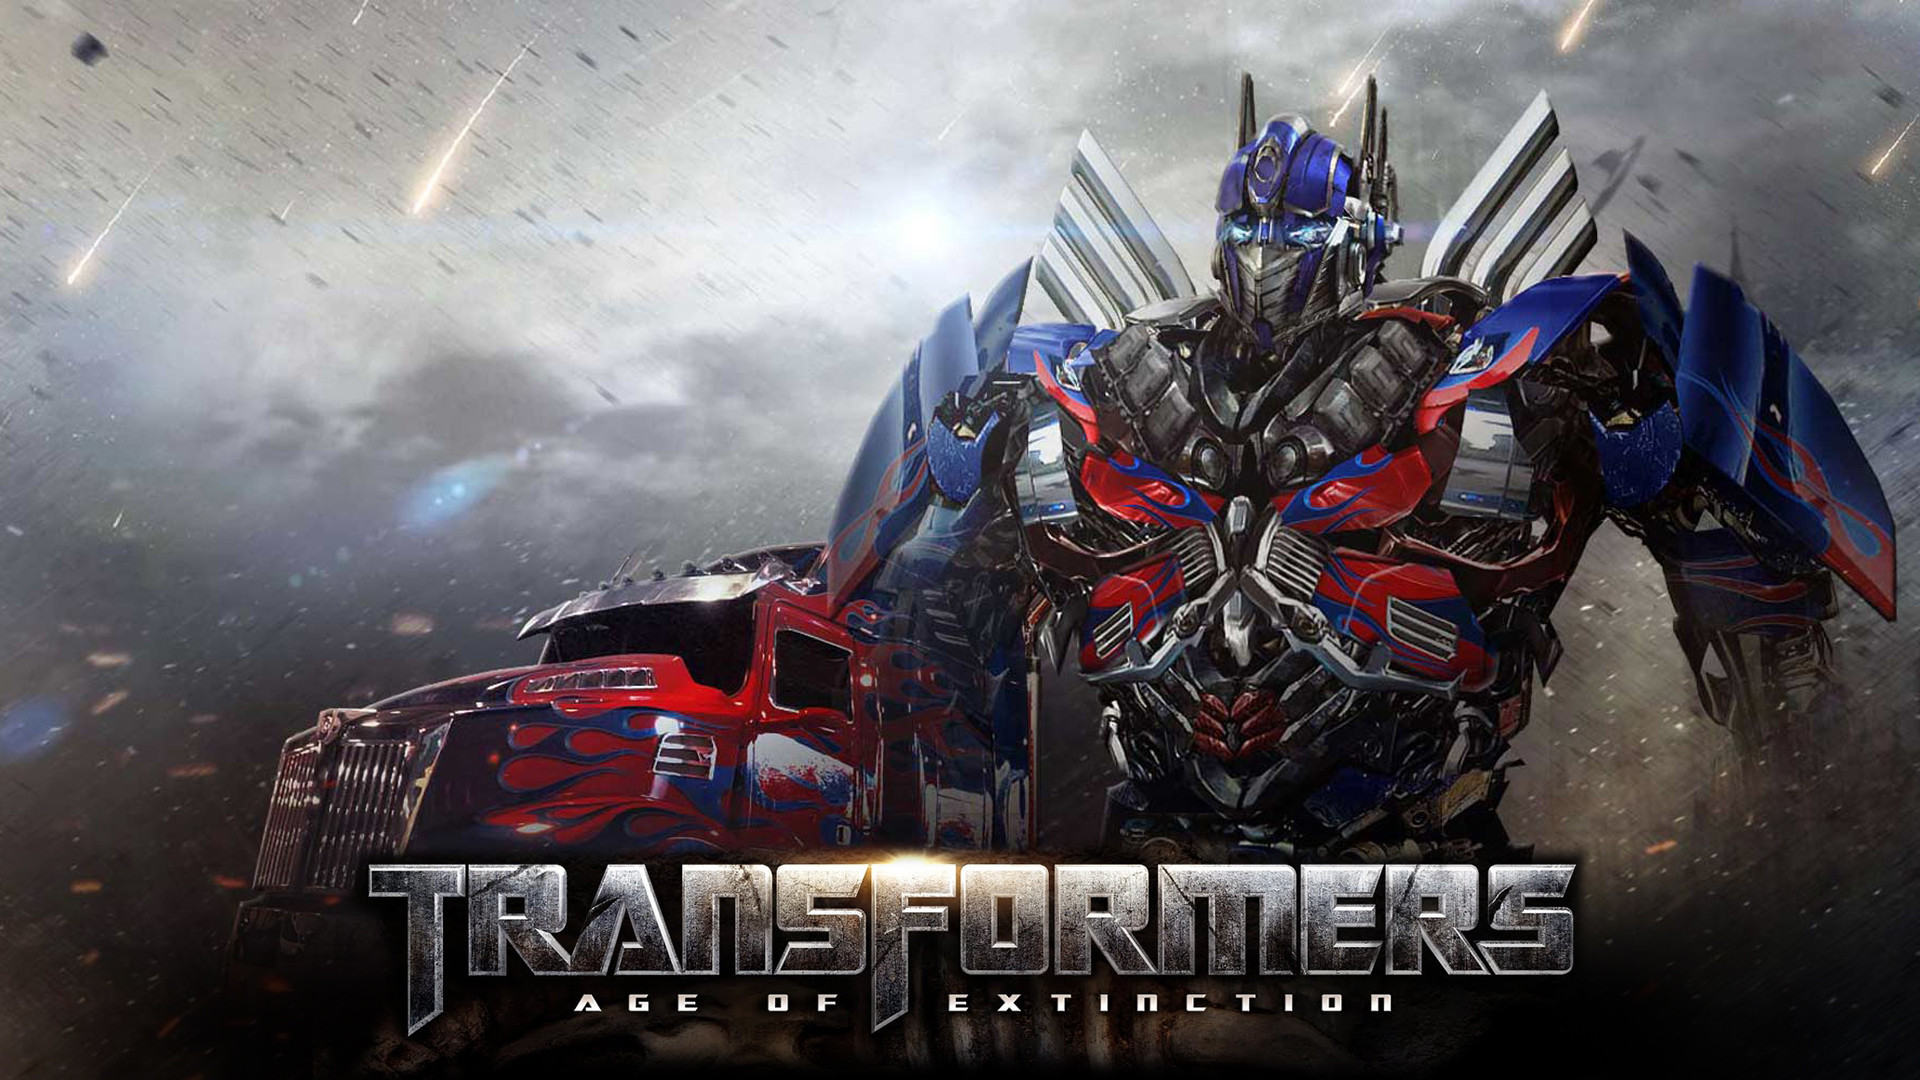 1920x1080 Wallpapers Transformers Optimus Prime (40 Wallpapers) – Adorable Wallpapers